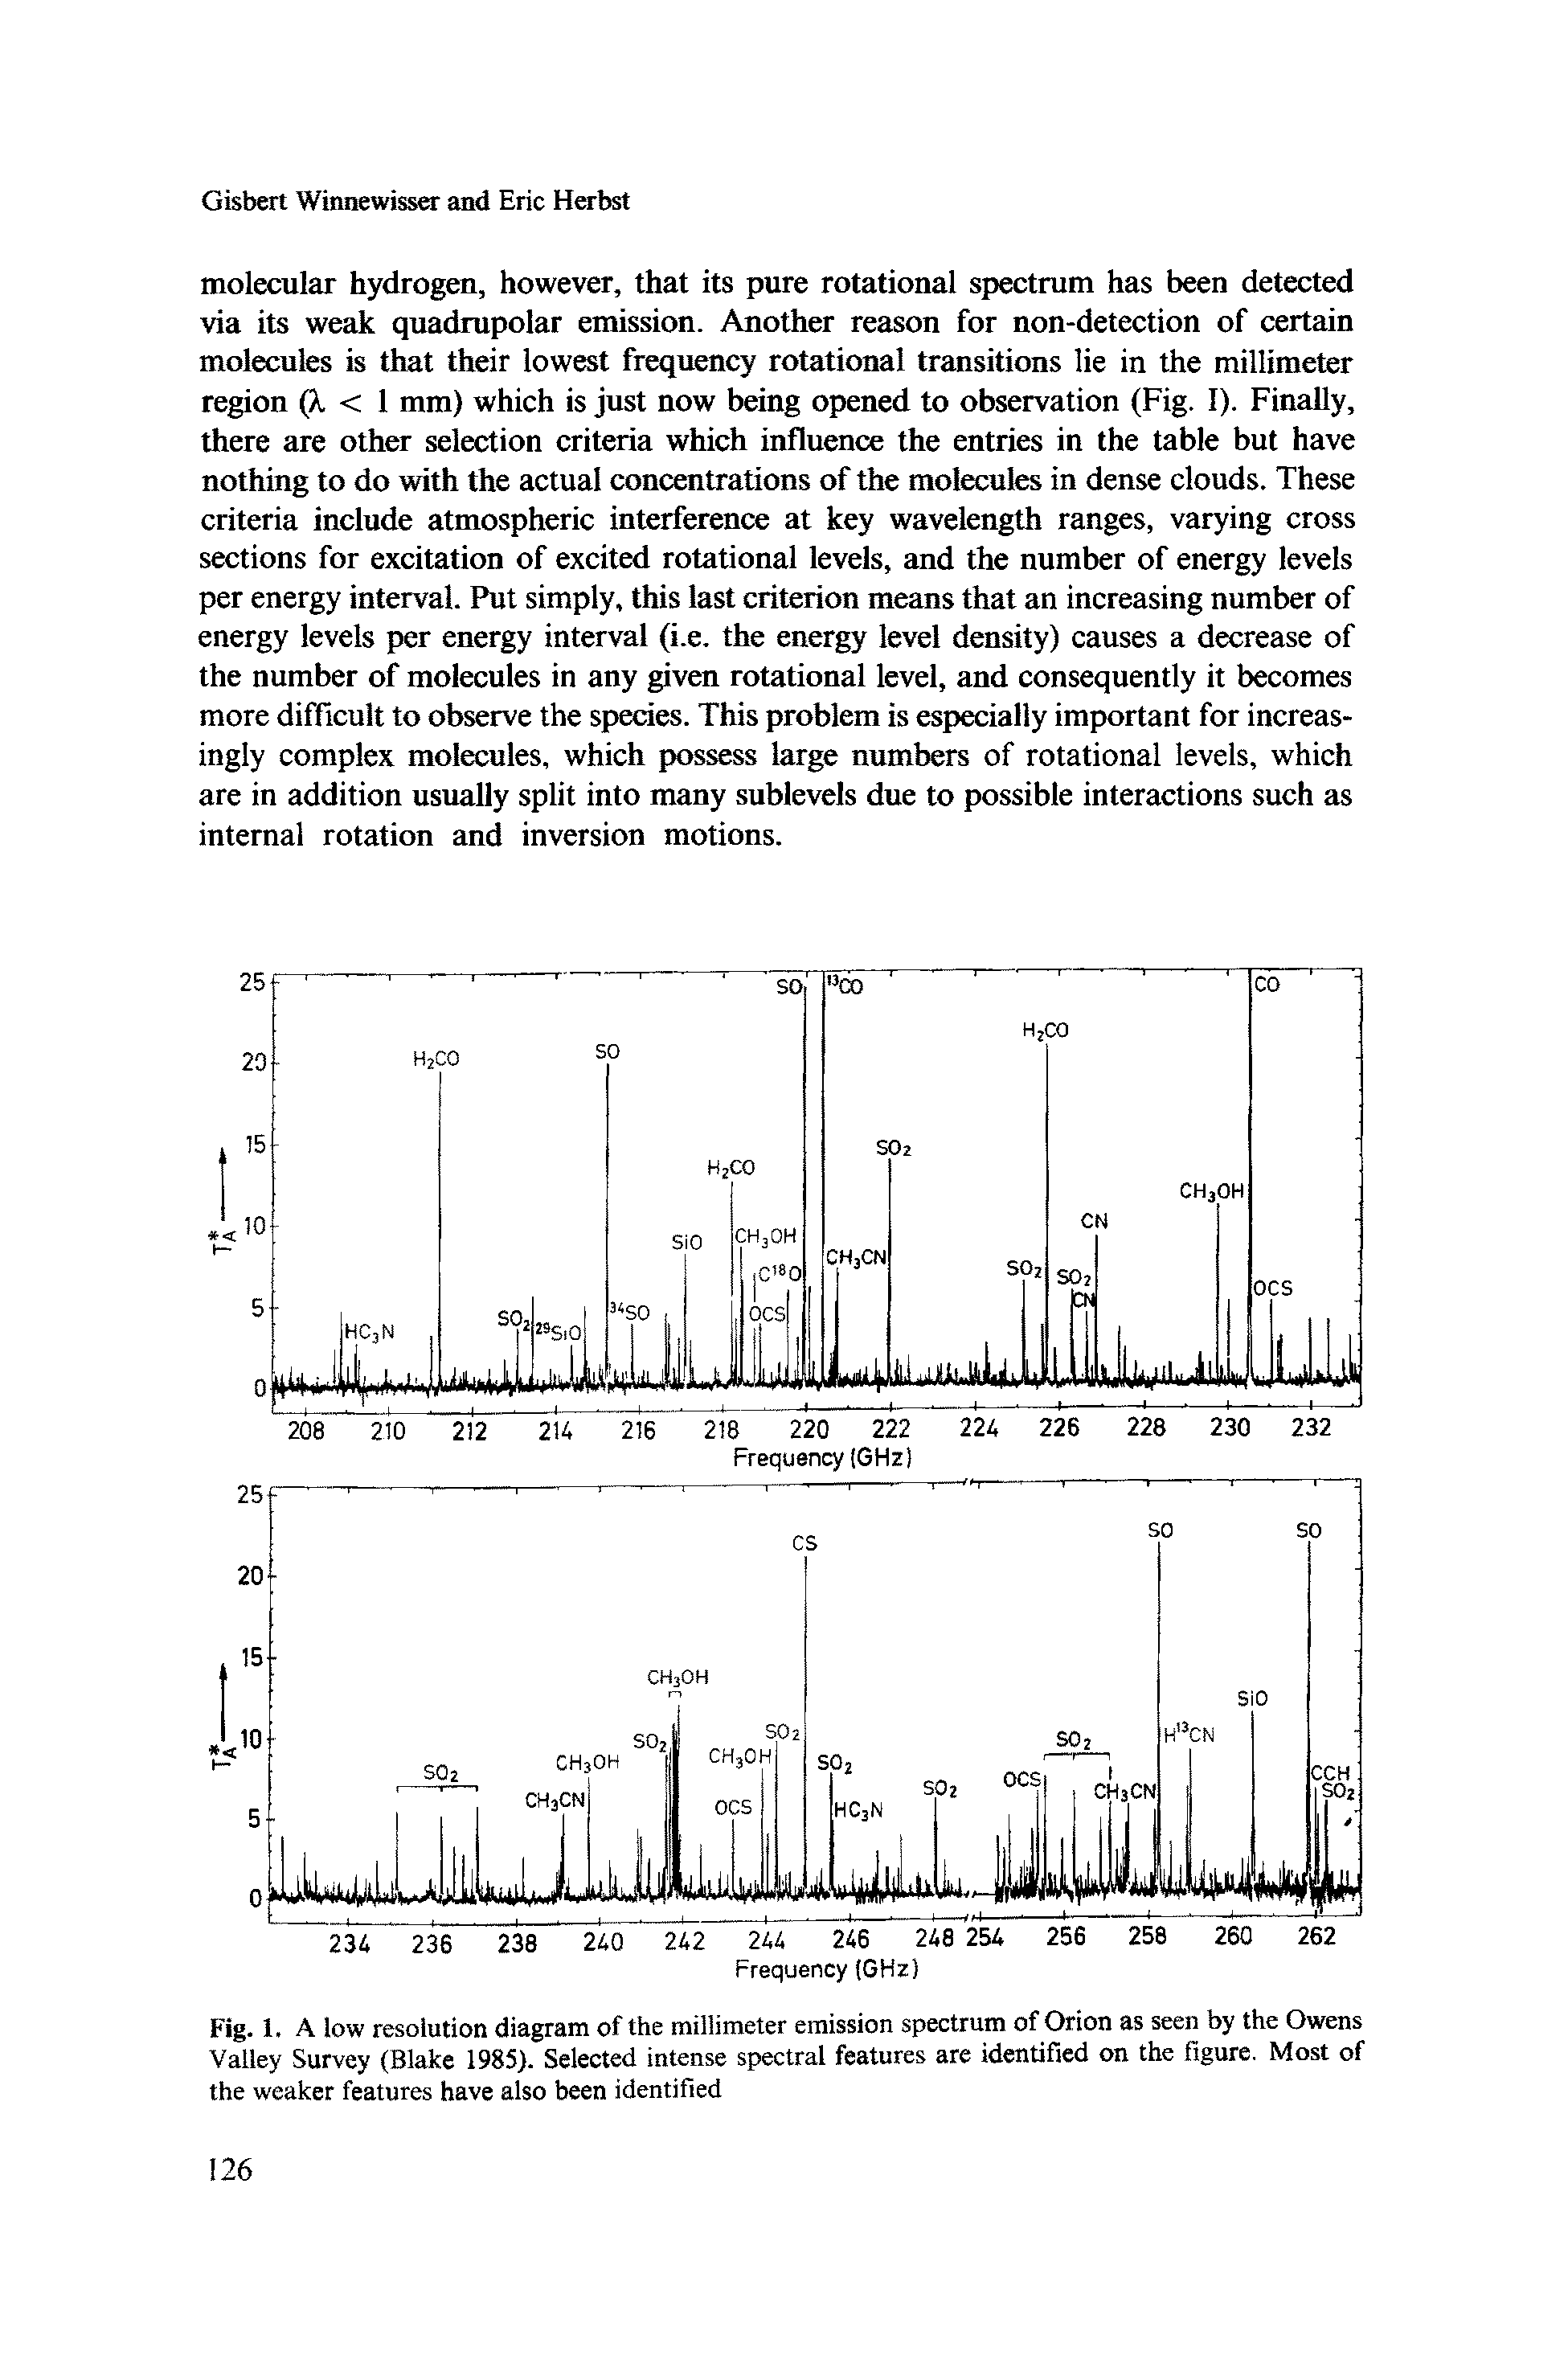 Fig. 1. A low resolution diagram of the millimeter emission spectrum of Orion as seen by the Owens Valley Survey (Blake 1985). Selected intense spectral features are identified on the figure. Most of the weaker features have also been identified...